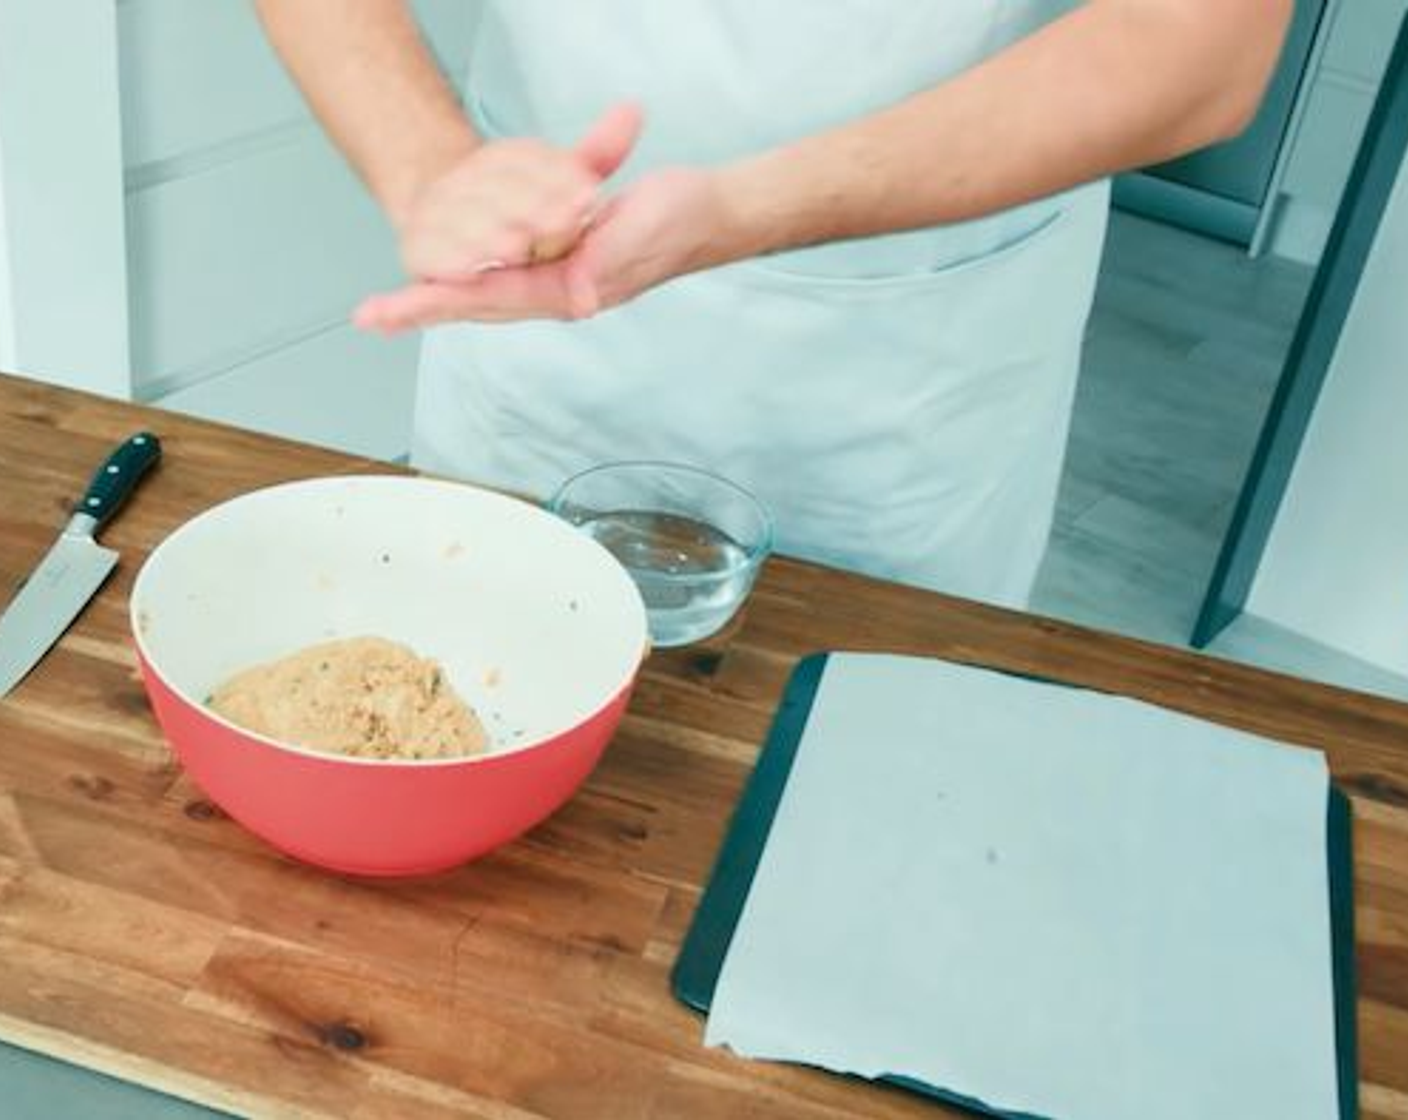 step 13 Now to form the Italian meatballs! Make sure you have cleared the space you are working on and prepare a tray with some baking paper on top. Wash your hands thoroughly, keeping them a little bit wet to make it easier to work the mixture.